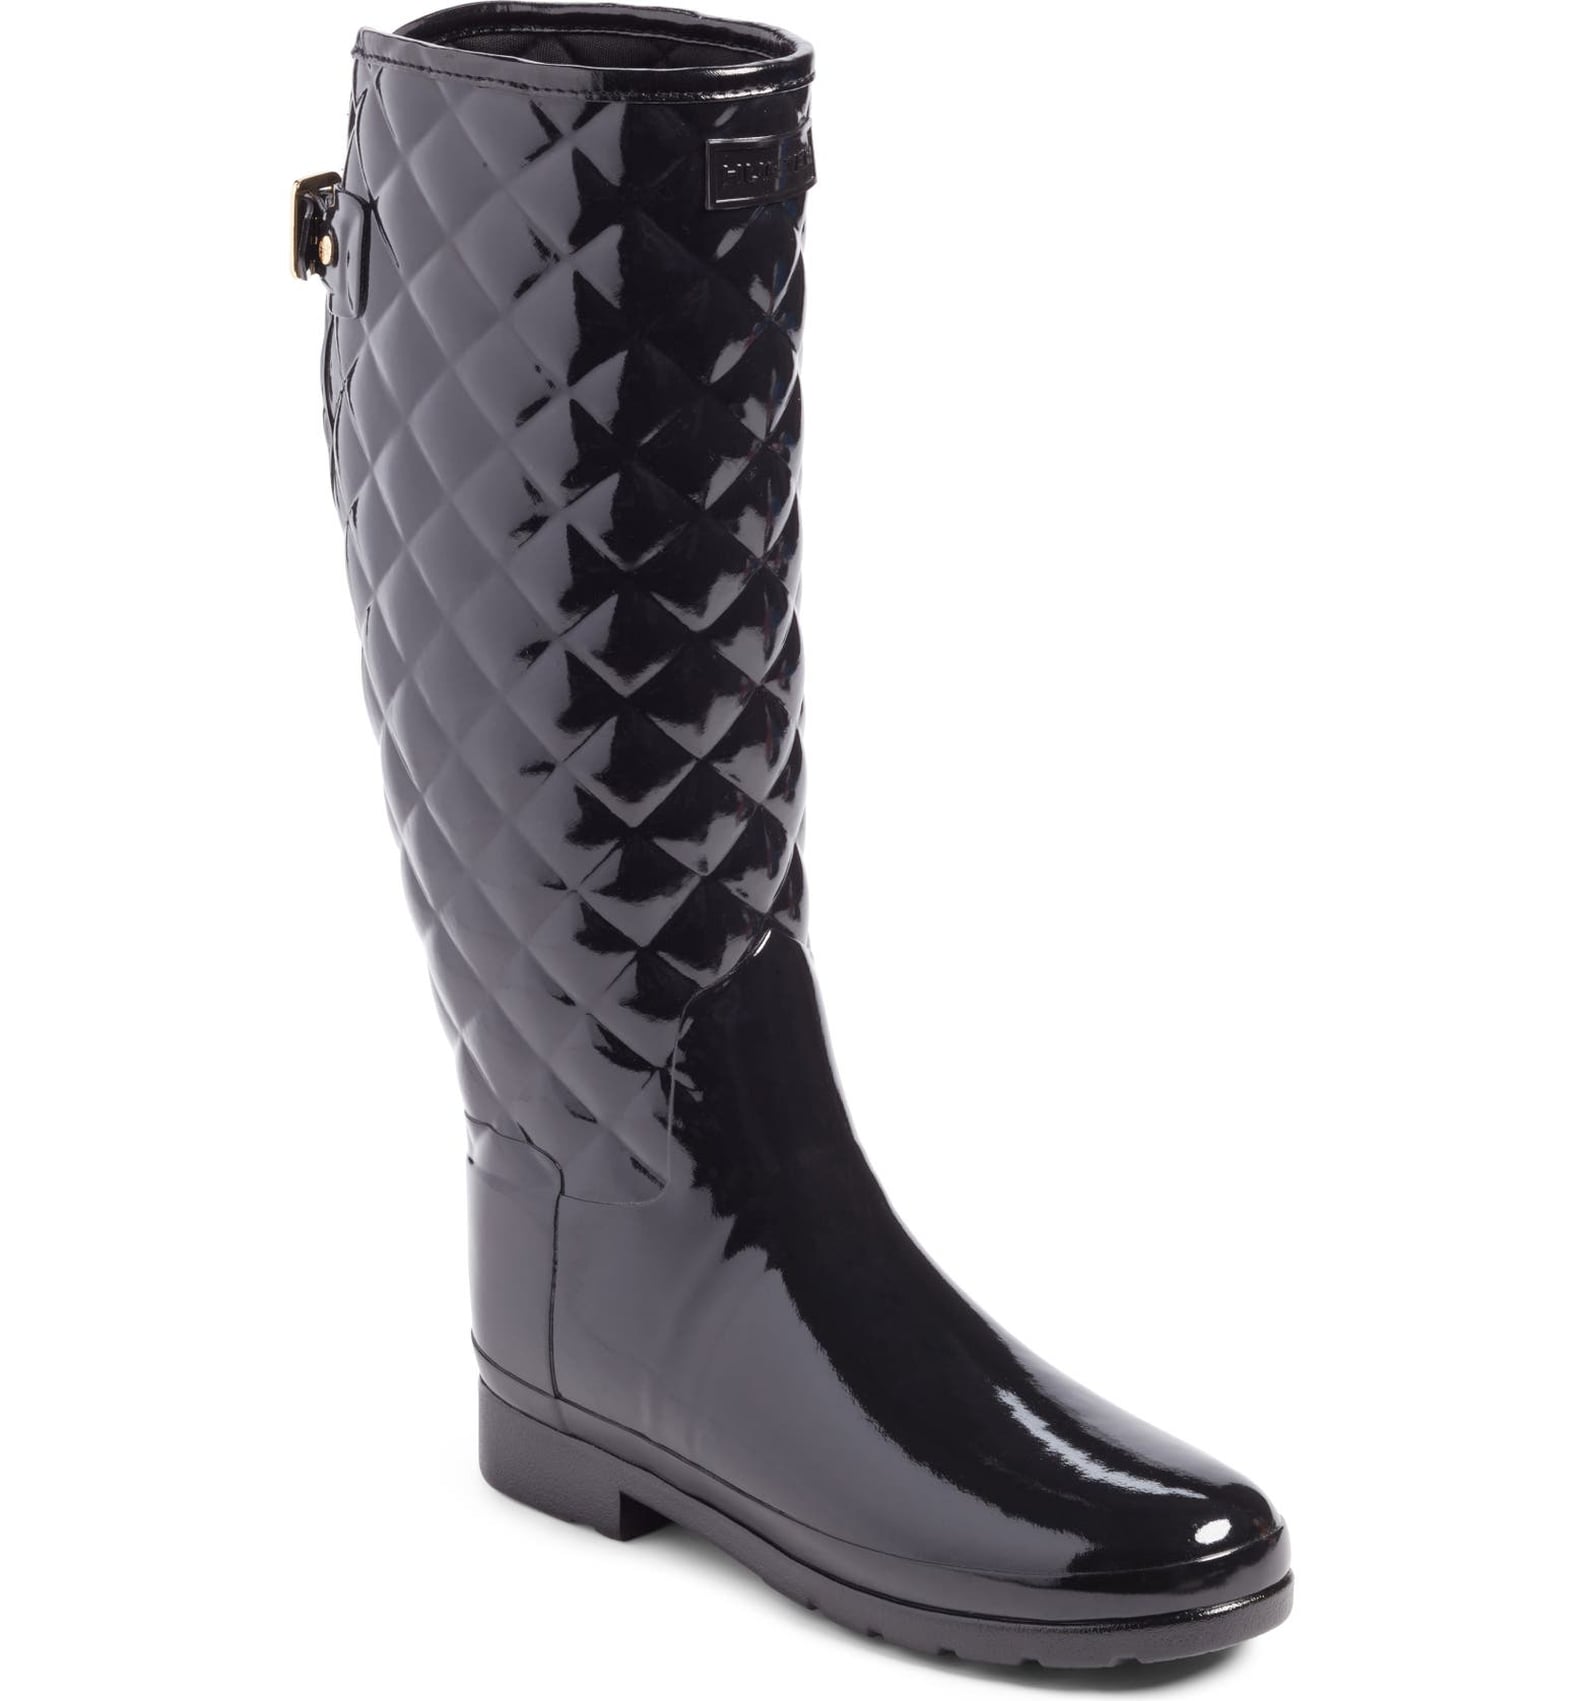 The Best Leather Boots For Women to Shop | POPSUGAR Fashion